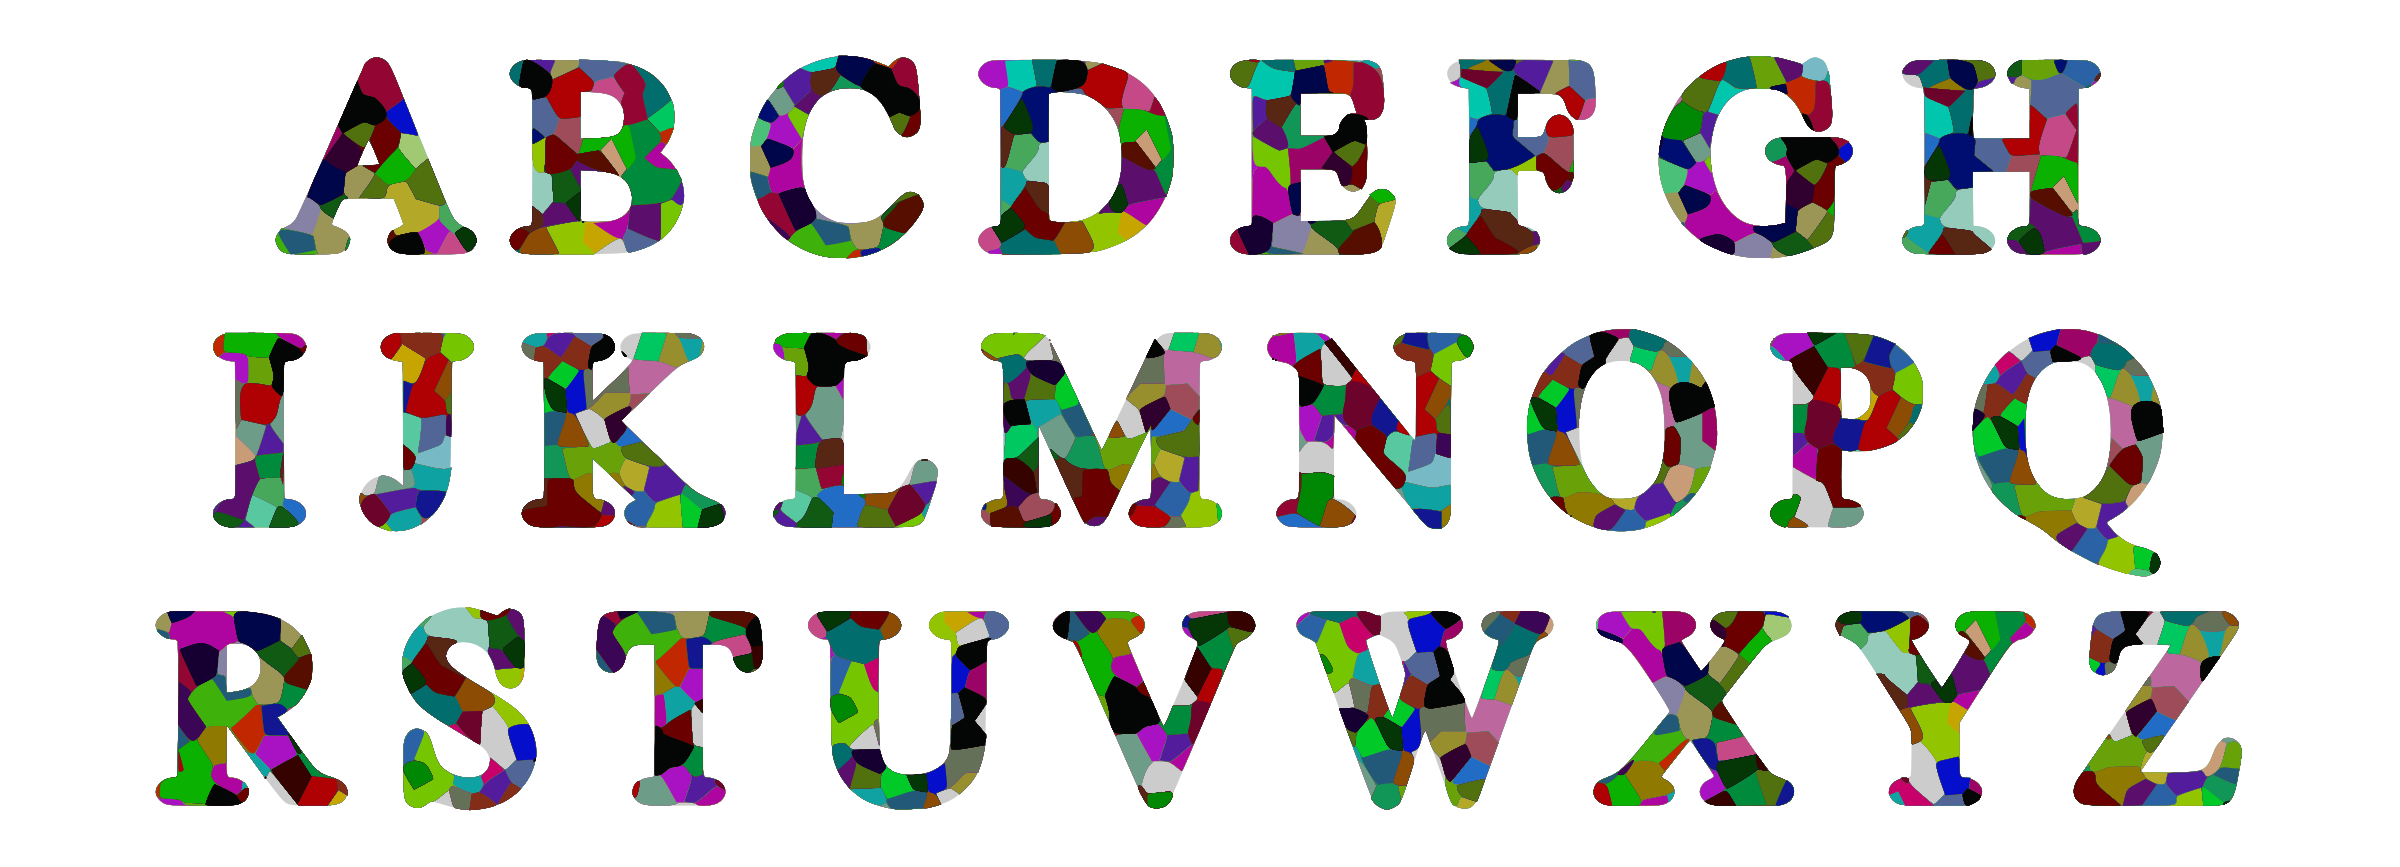 Download PNG image - Alphabet PNG Picture 